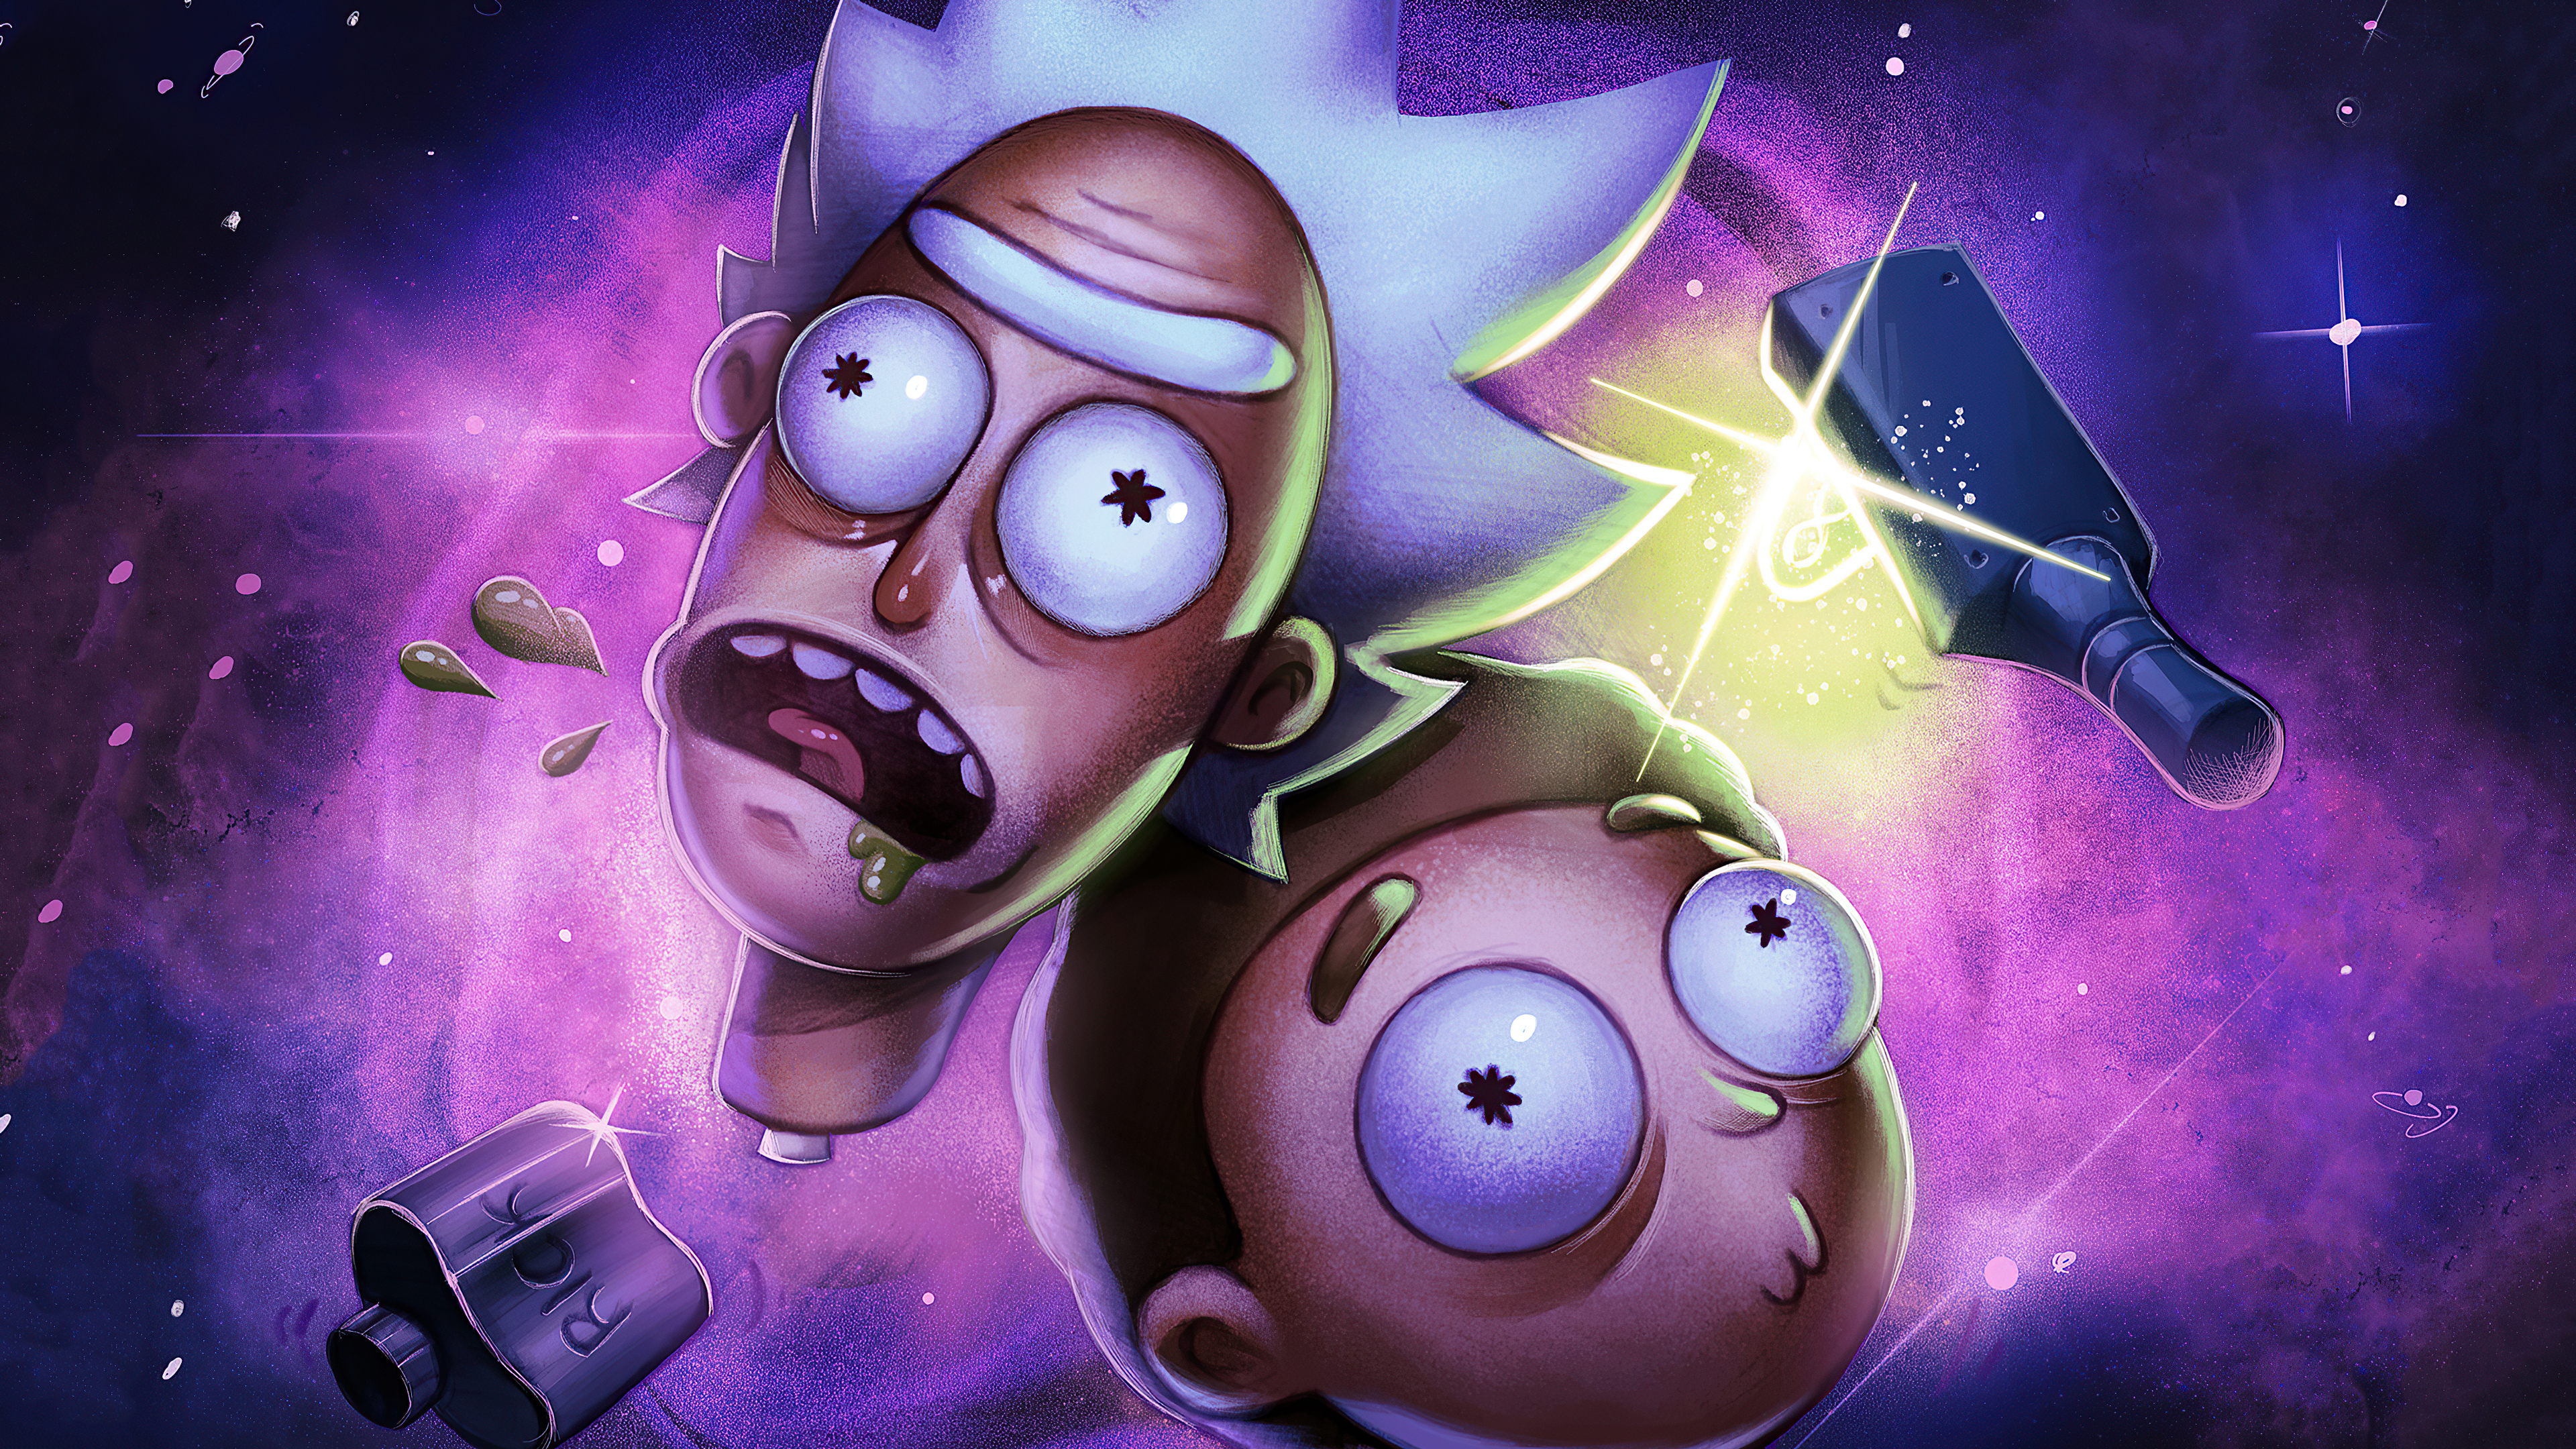 rick and morty, tv show, morty smith, rick sanchez wallpaper for mobile